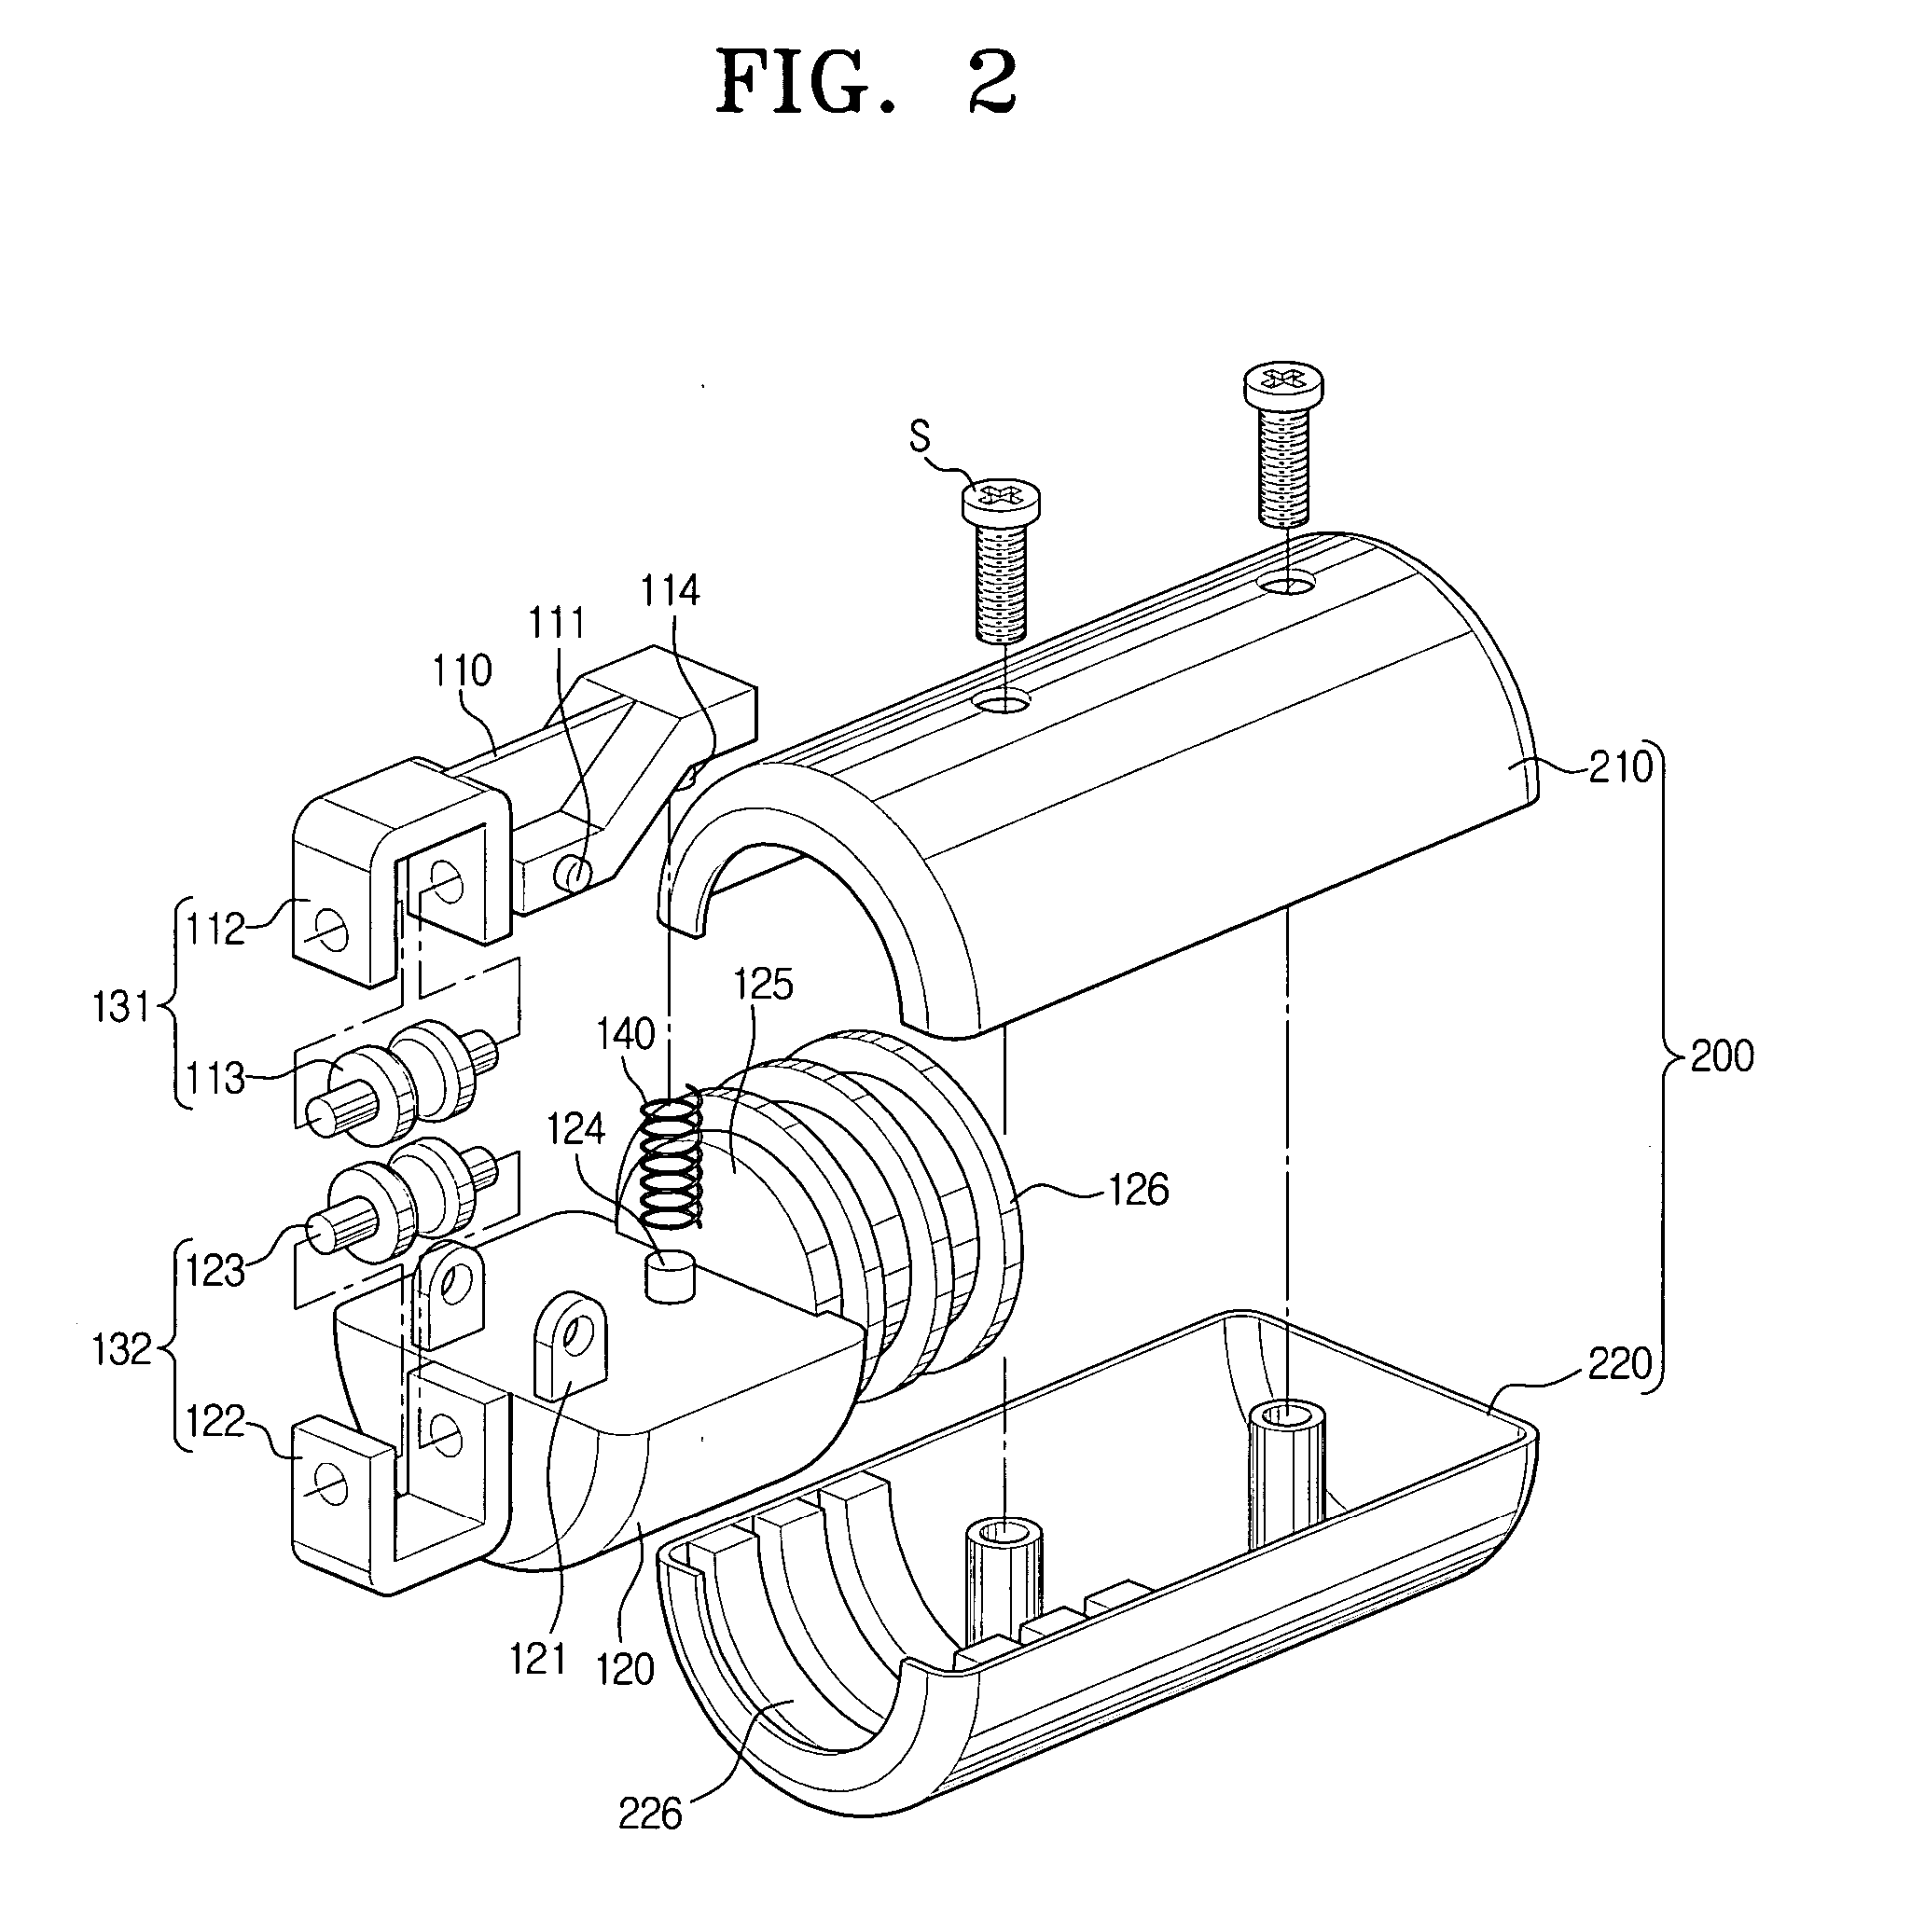 Power cord arranging device